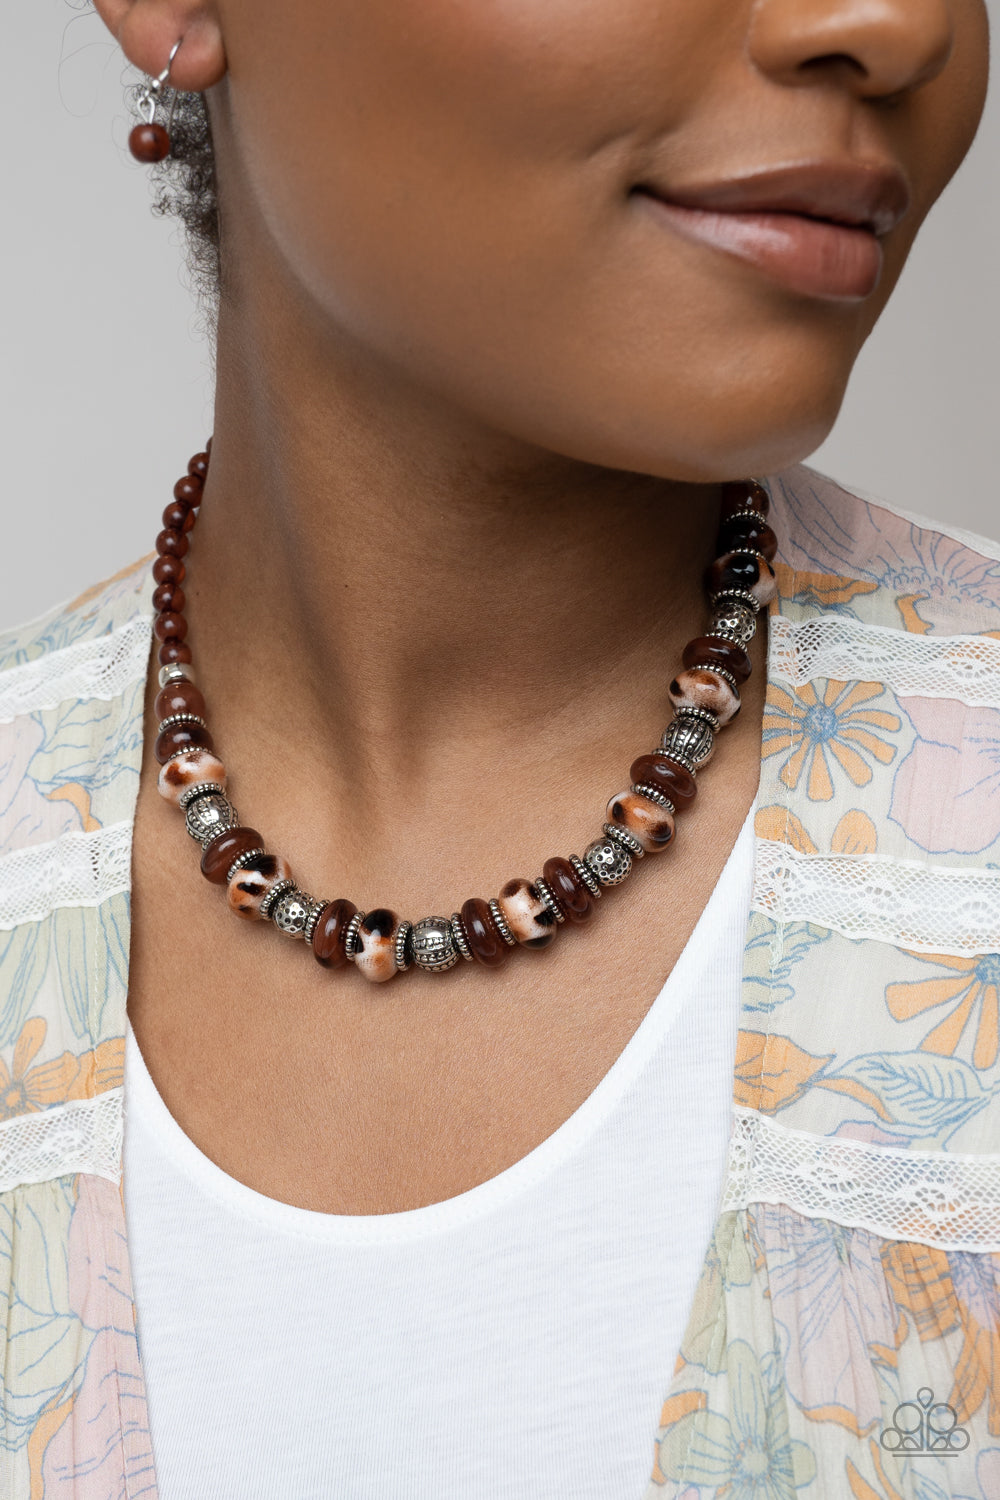 Warped Whimsicality Brown Necklace - Paparazzi Accessories  An earthy collection of dotted silver beads, rounded milky Caramel Café beads, studded silver rings, brown-spotted ceramic-like beads and textured silver beads are threaded along an invisible wire below the collar for an authentic artisan flair. Features an adjustable clasp closure.  Sold as one individual necklace. Includes one pair of matching earrings.  P2ST-BNXX-081LN